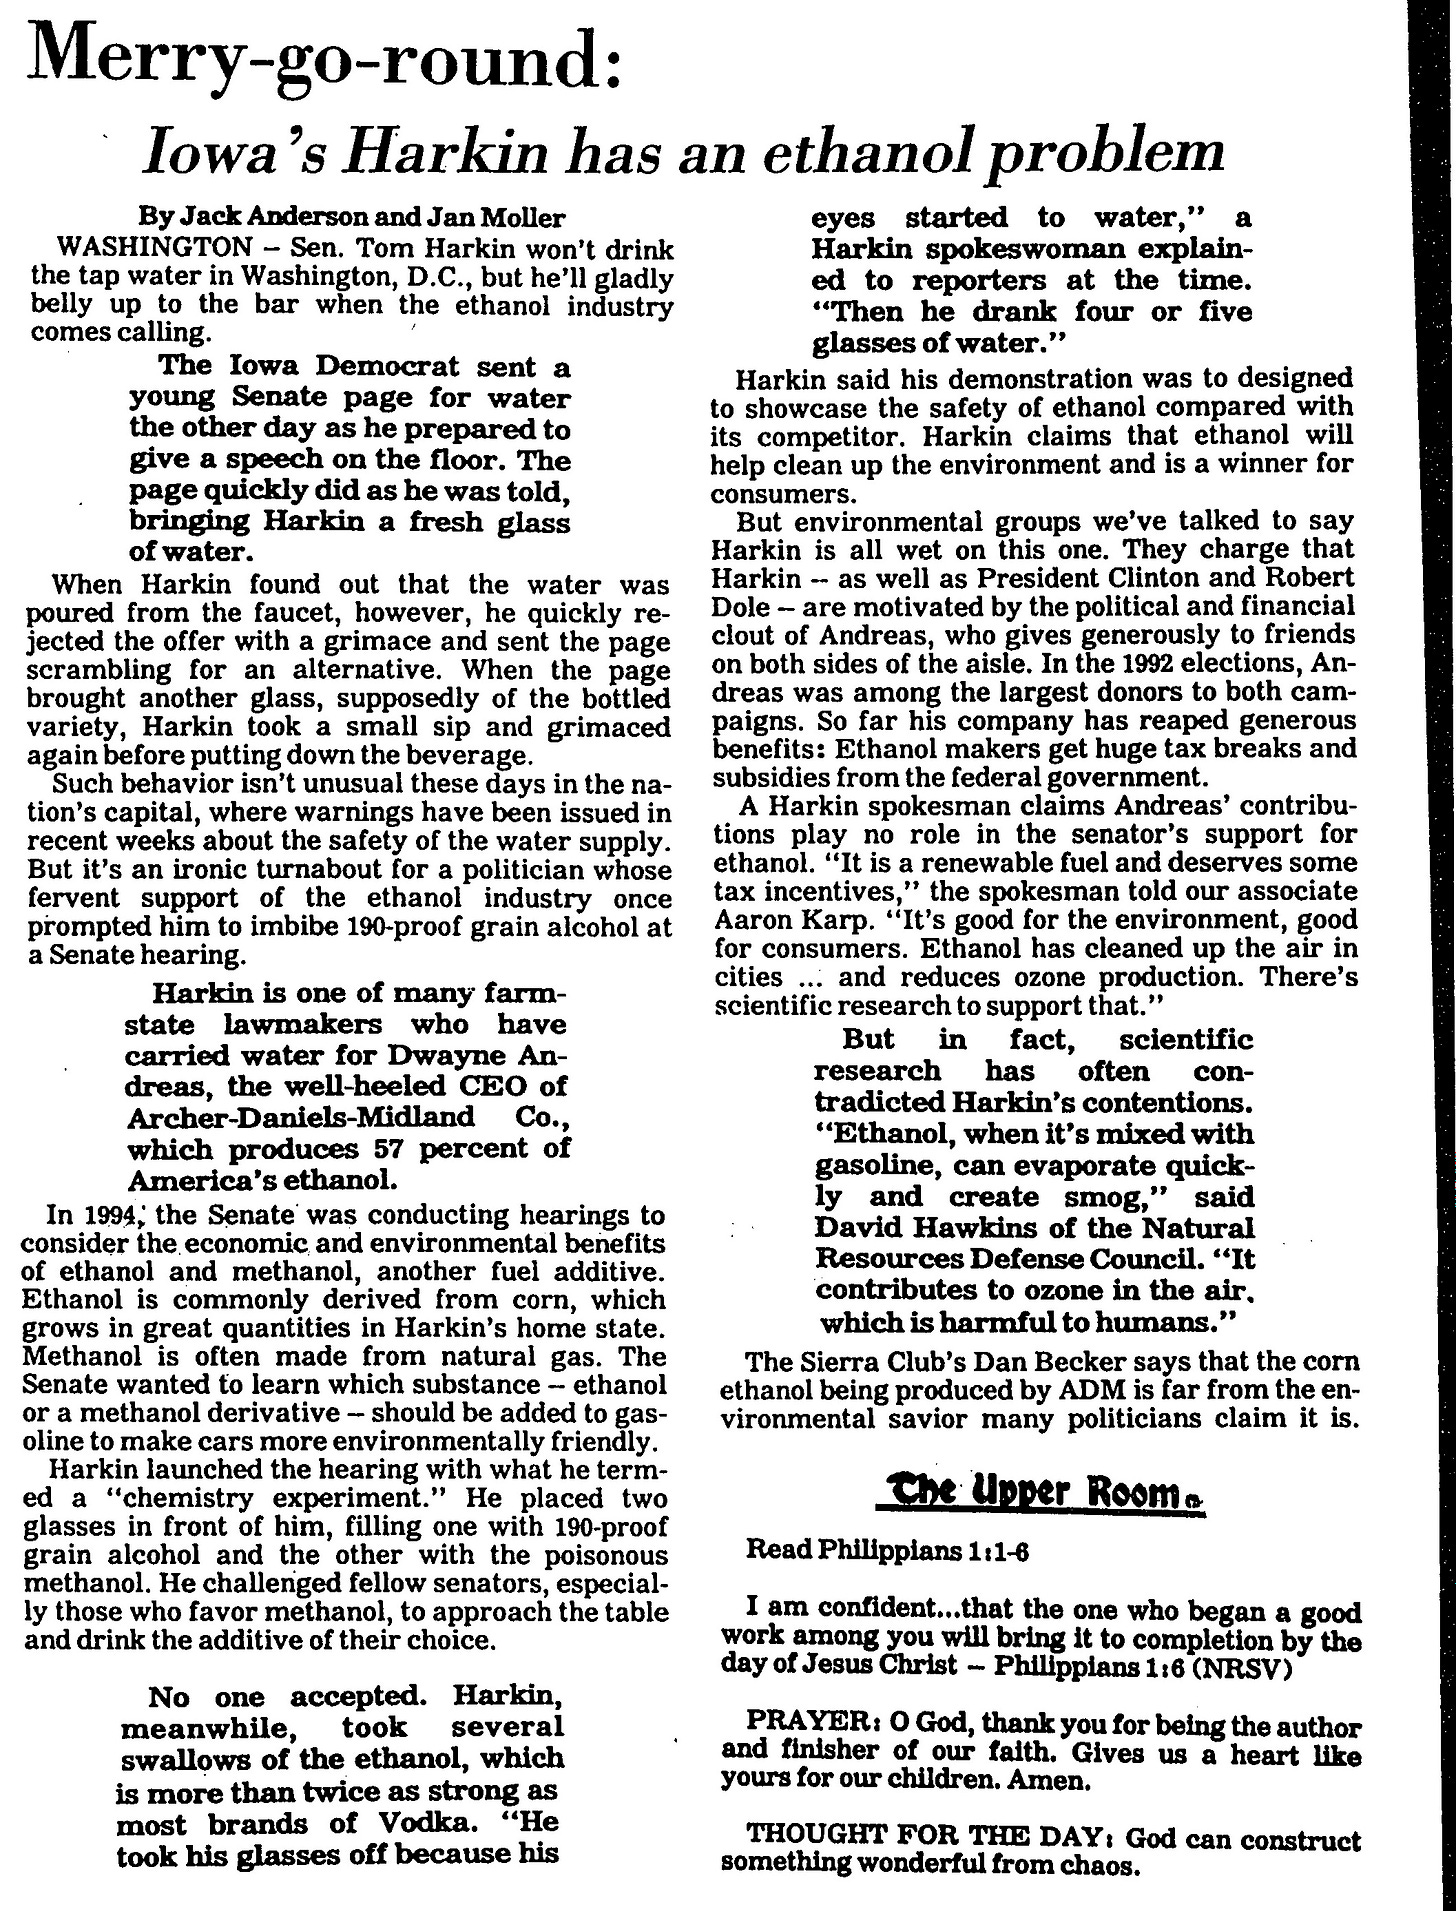 1995 article in the CR Gazette: Iowa's Harkin has an ethanol problem  WASHINGTON - Sen. Tom Harkin won't drink  the tap water in Washington,D.C., but he'll gladly belly up to the bar when the ethanol industry comes calling.  The Iowa Democrat sent a young Senate page for water the other day as he prepared to give a speech on the floor. The page quickly did as he was told, bringing Harkin a fresh glass of water.  When Harkin found out that the water was poured from the faucet, however, he quickly rejected the offer with a grimace and sent the page scrambling for an alternative. When the page brought another glass, supposedly of the bottled variety, Harkin took a small sip and grimaced again before putting down the beverage.  Such behavior isn't unusual these days in the na-tion's capital, where warnings have been issued in recent weeks about the safety of the water supply. But it's an ironic turnabout for a politician whose fervent support of the ethanol industry once prompted him to imbibe 190-proof grain alcohol at a Senate hearing.  Harkin is one of many farm- state lawmakers who have carried water for Dwayne Andreas, the well-heeled CEO of Archer-Daniels-Midland C o . which produces 57 percent of America's ethanol.  eyes started to water," a Harkin spokeswoman explain- ed to reporters at the time. "Then he drank four or five glasses of water."  Harkin said his demonstration was designed to showcase the safety of ethanol compared with its competitor. Harkin claims that ethanol will help clean up the environment and is a winner for consumers.  But environmental groups we've talked to say Harkin is all wet on this one. They charge that Harkin - as well as President Clinton and Robert Dole- are motivated by the political and financial clout of Andreas, who gives generously to friends on both sides of the aisle. In the 1992elections, Andreas was among the largest donors to both campaigns. So far his company has reaped generous benefits: Ethanol makers get huge tax breaks and subsidies from the federal government.  A Harkin spokesman claims Andreas' contributions play no role in the senator's support for ethanol. "It is a renewable fuel and deserves some tax incentives," the spokesman told our associate Aaron Karp."It's good for the environment, good for consumers. Ethanol has cleaned up the air in cities ... and reduces ozone production. There's scientific research to support that."  But in fact, scientific research has often contradicted Harkin's contentions. "Ethanol, when it's mixed with gasoline, can evaporate quickly and create smog," said David Hawkins of the Natural Resources Defense Council. "It contributes to ozone in the air.  which is harmful to humans."  In 1994 the Senate was conducting hearings to consider the economic and environmental benefits Three pieces of Army equip- of ethanol and methanol, another fuel additive.  Methanol is often made from natural gas. The  The Sierra Club's Dan Becker says that the corn ethanol being produced by ADM is far from the environmental savior many politicians claim it is. 